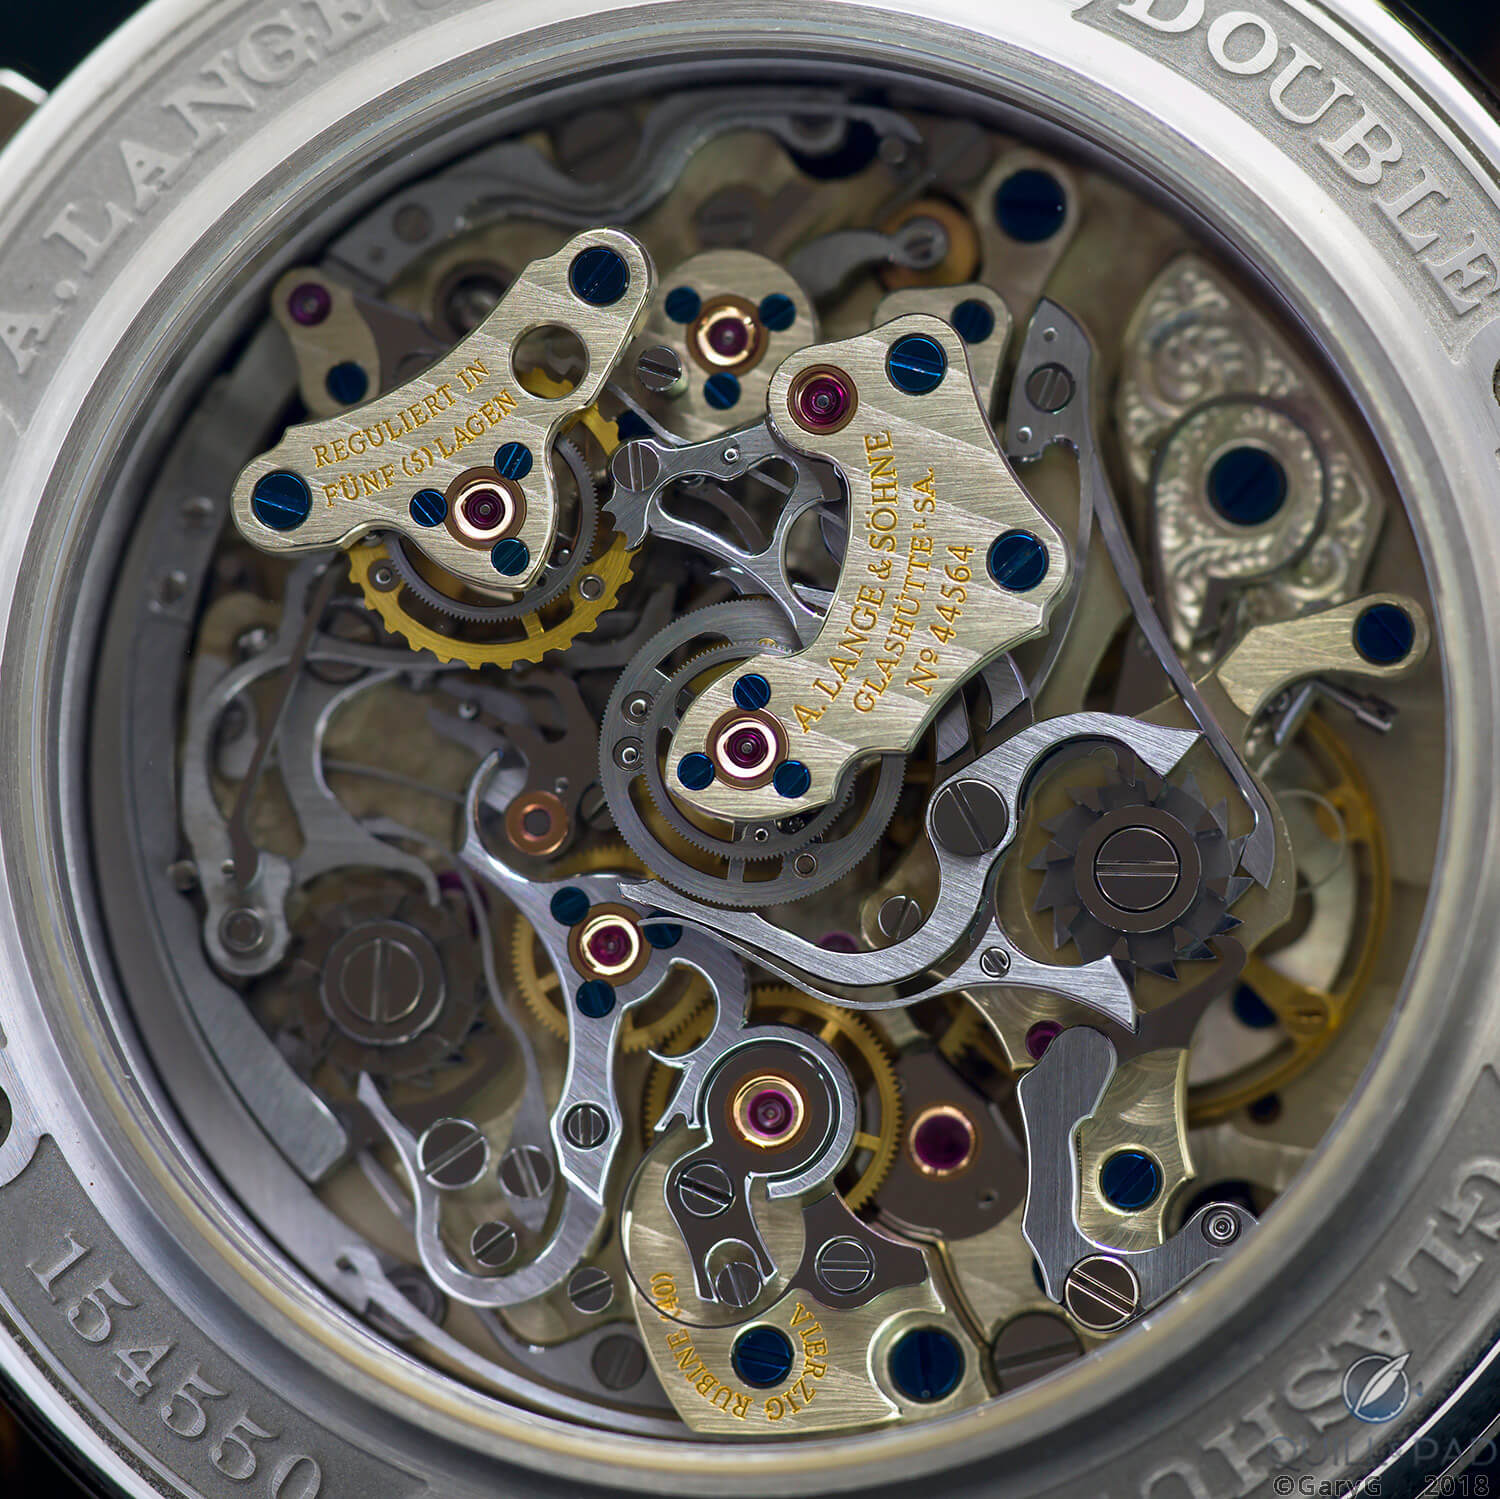 Lange & Söhne Double Split movement detail, with sharp interior angle on lever at bottom center